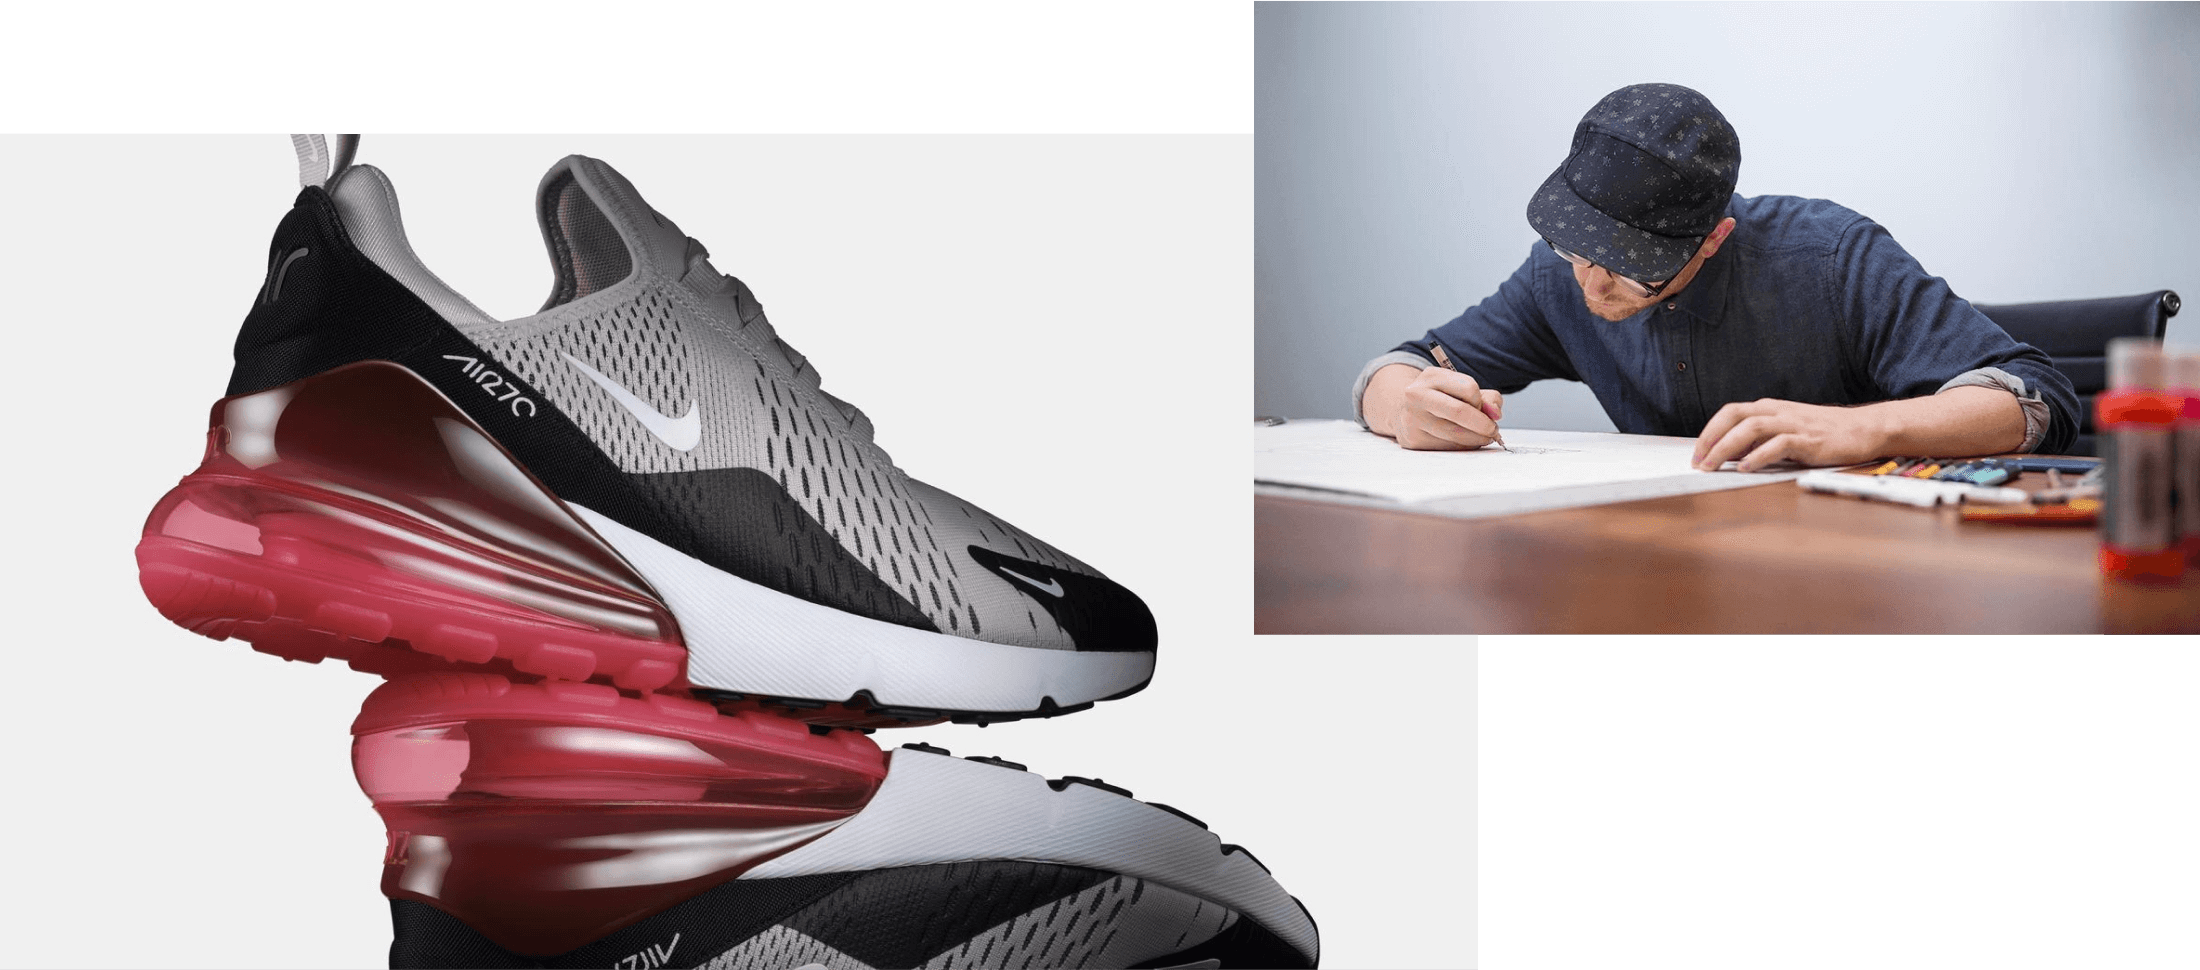 The history of the Nike Air Max 270